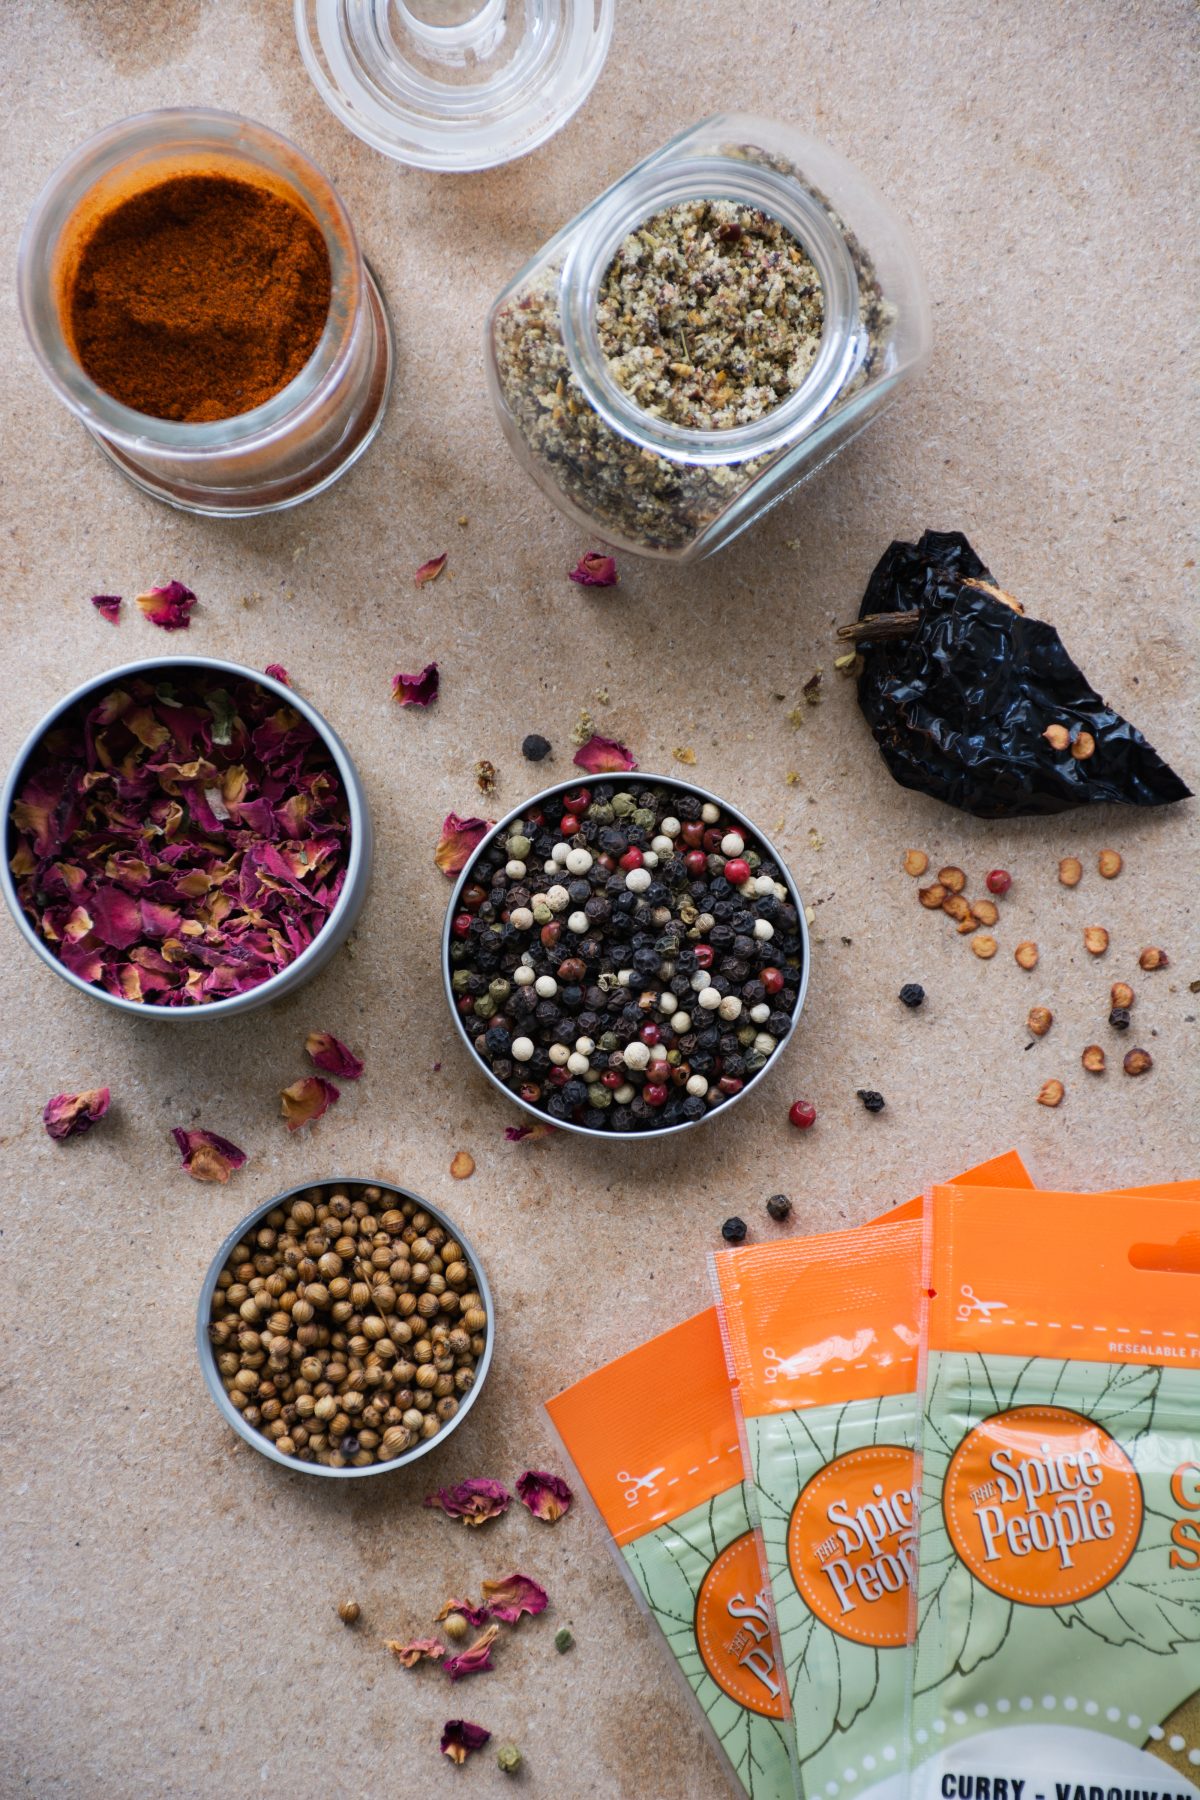 The Spice People (Spices & Blends) - product photography - thespiceadventuress.com